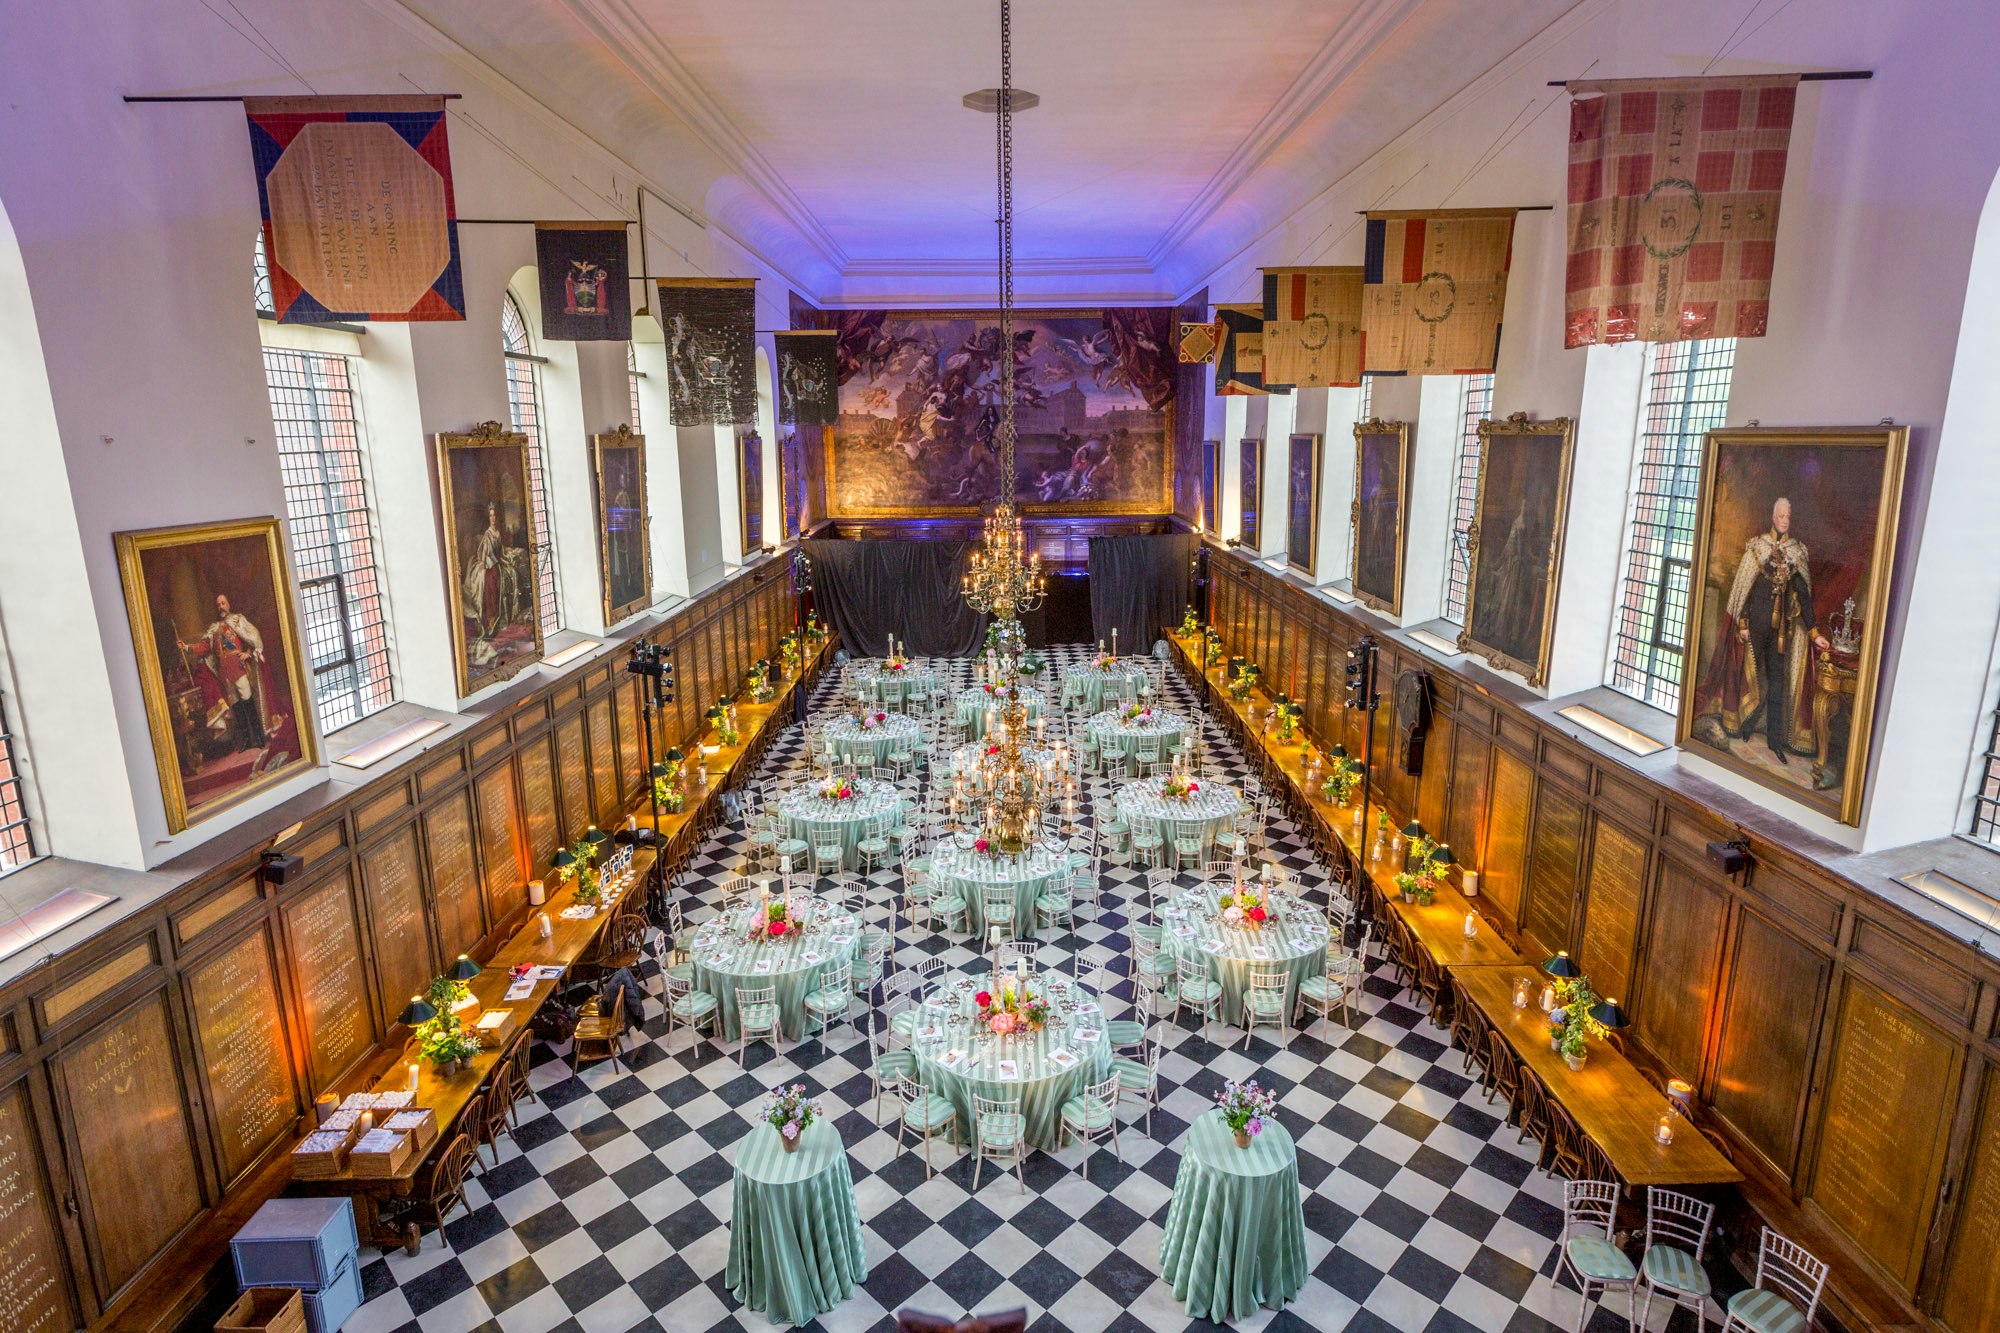 Royal Hospital Chelsea - The Great Hall image 7